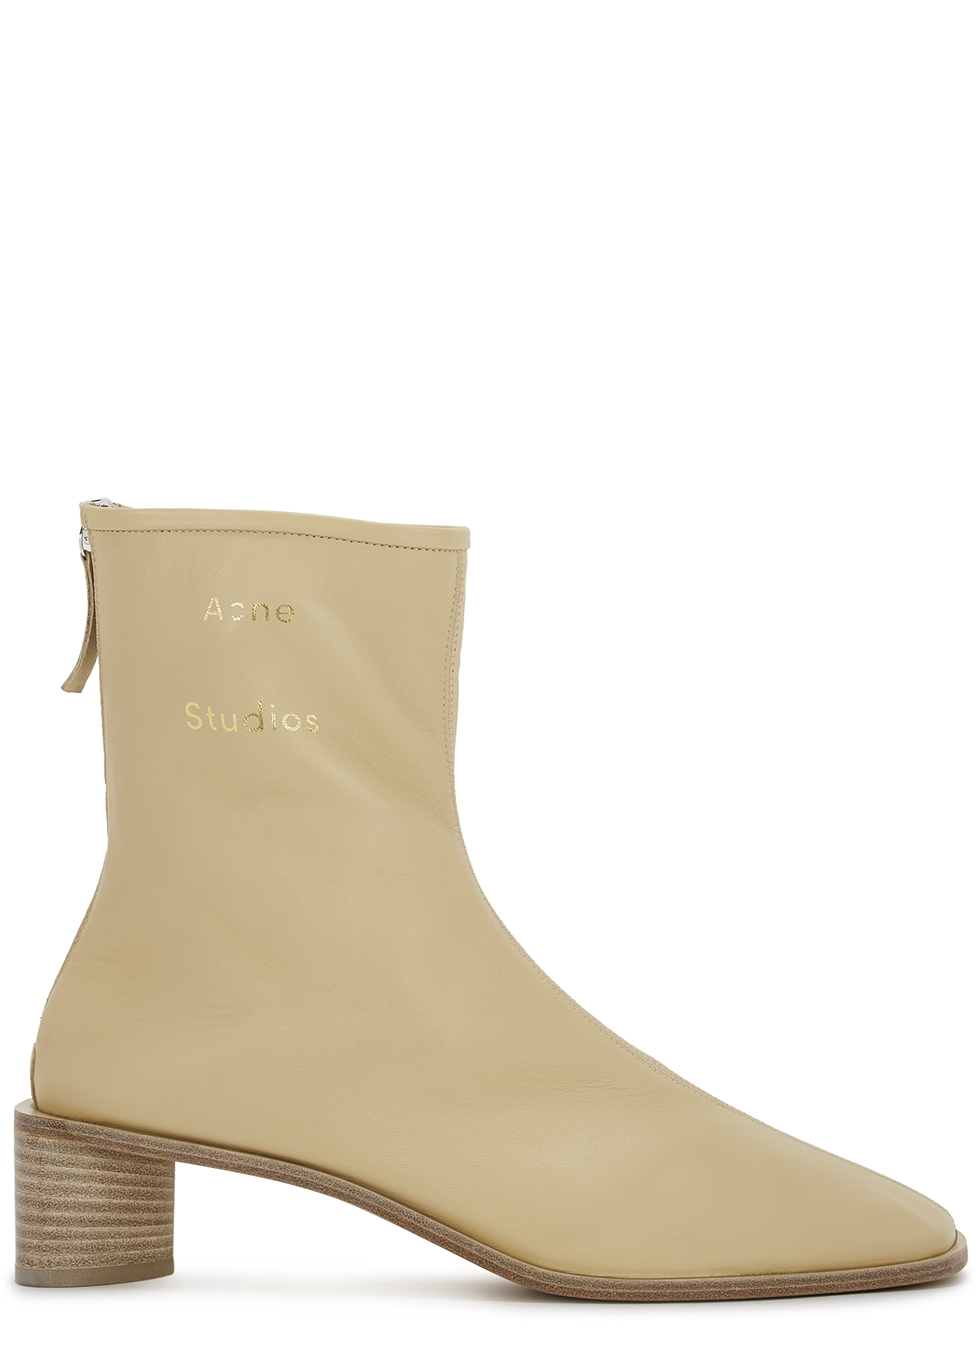 acne ankle boots